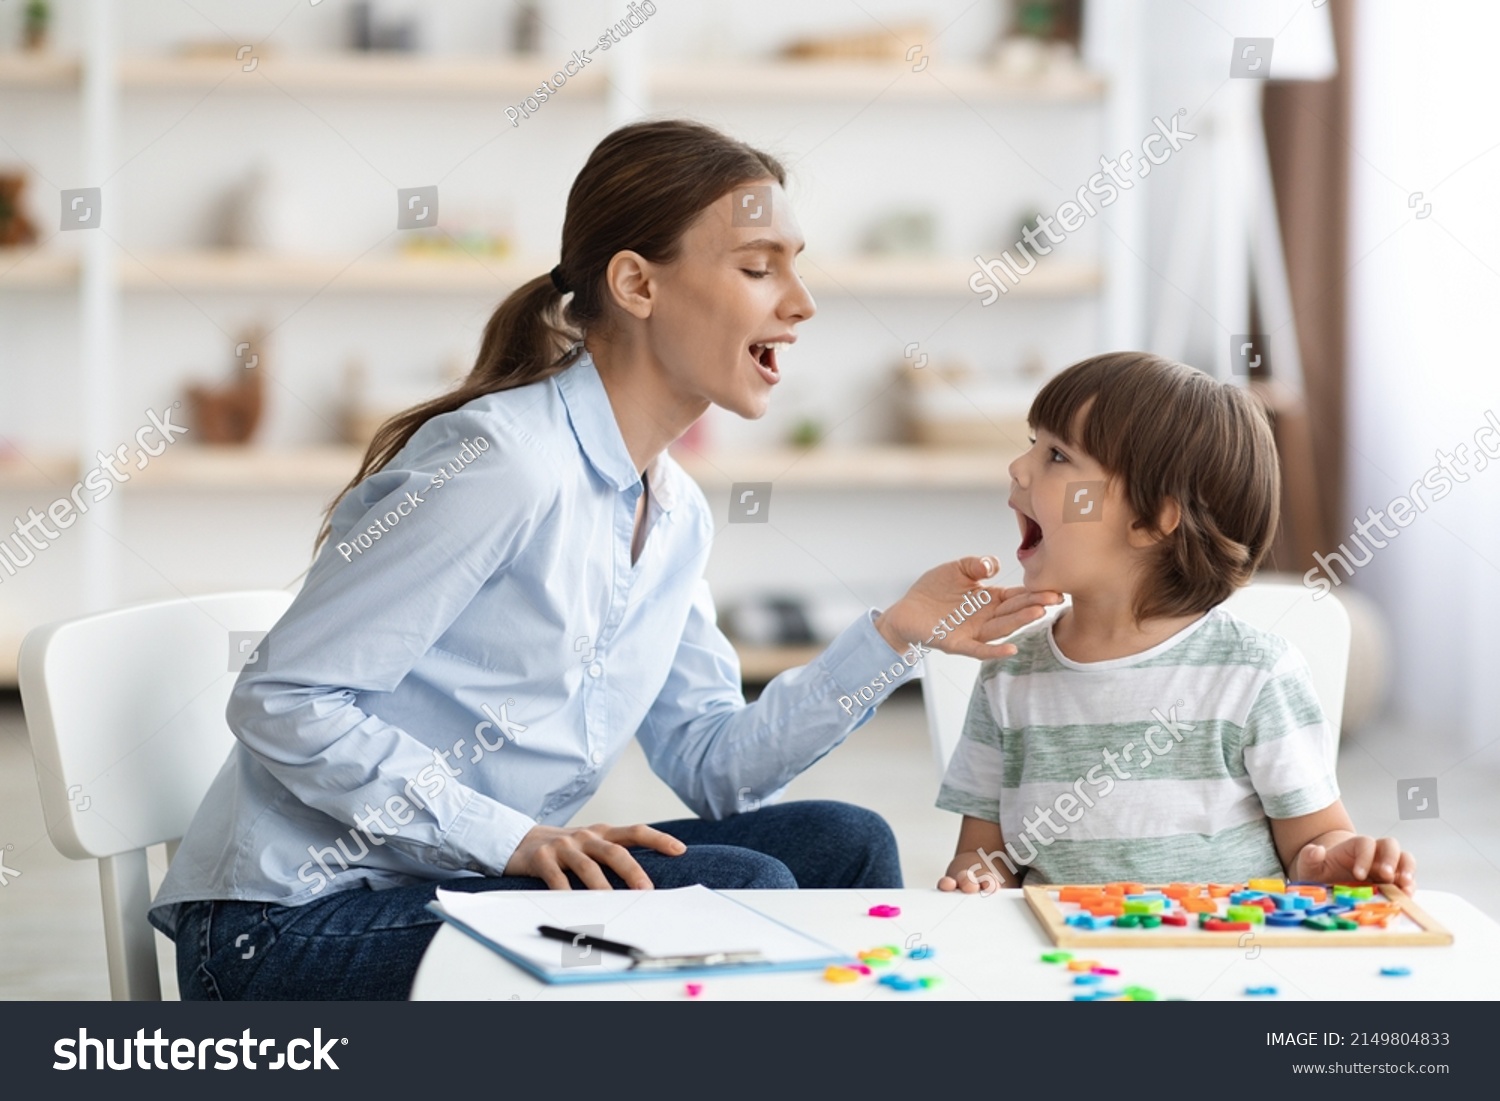 Professional woman speech therapist helping little boy to pronounce right sounds, showing mouth articulation at office, free space #2149804833